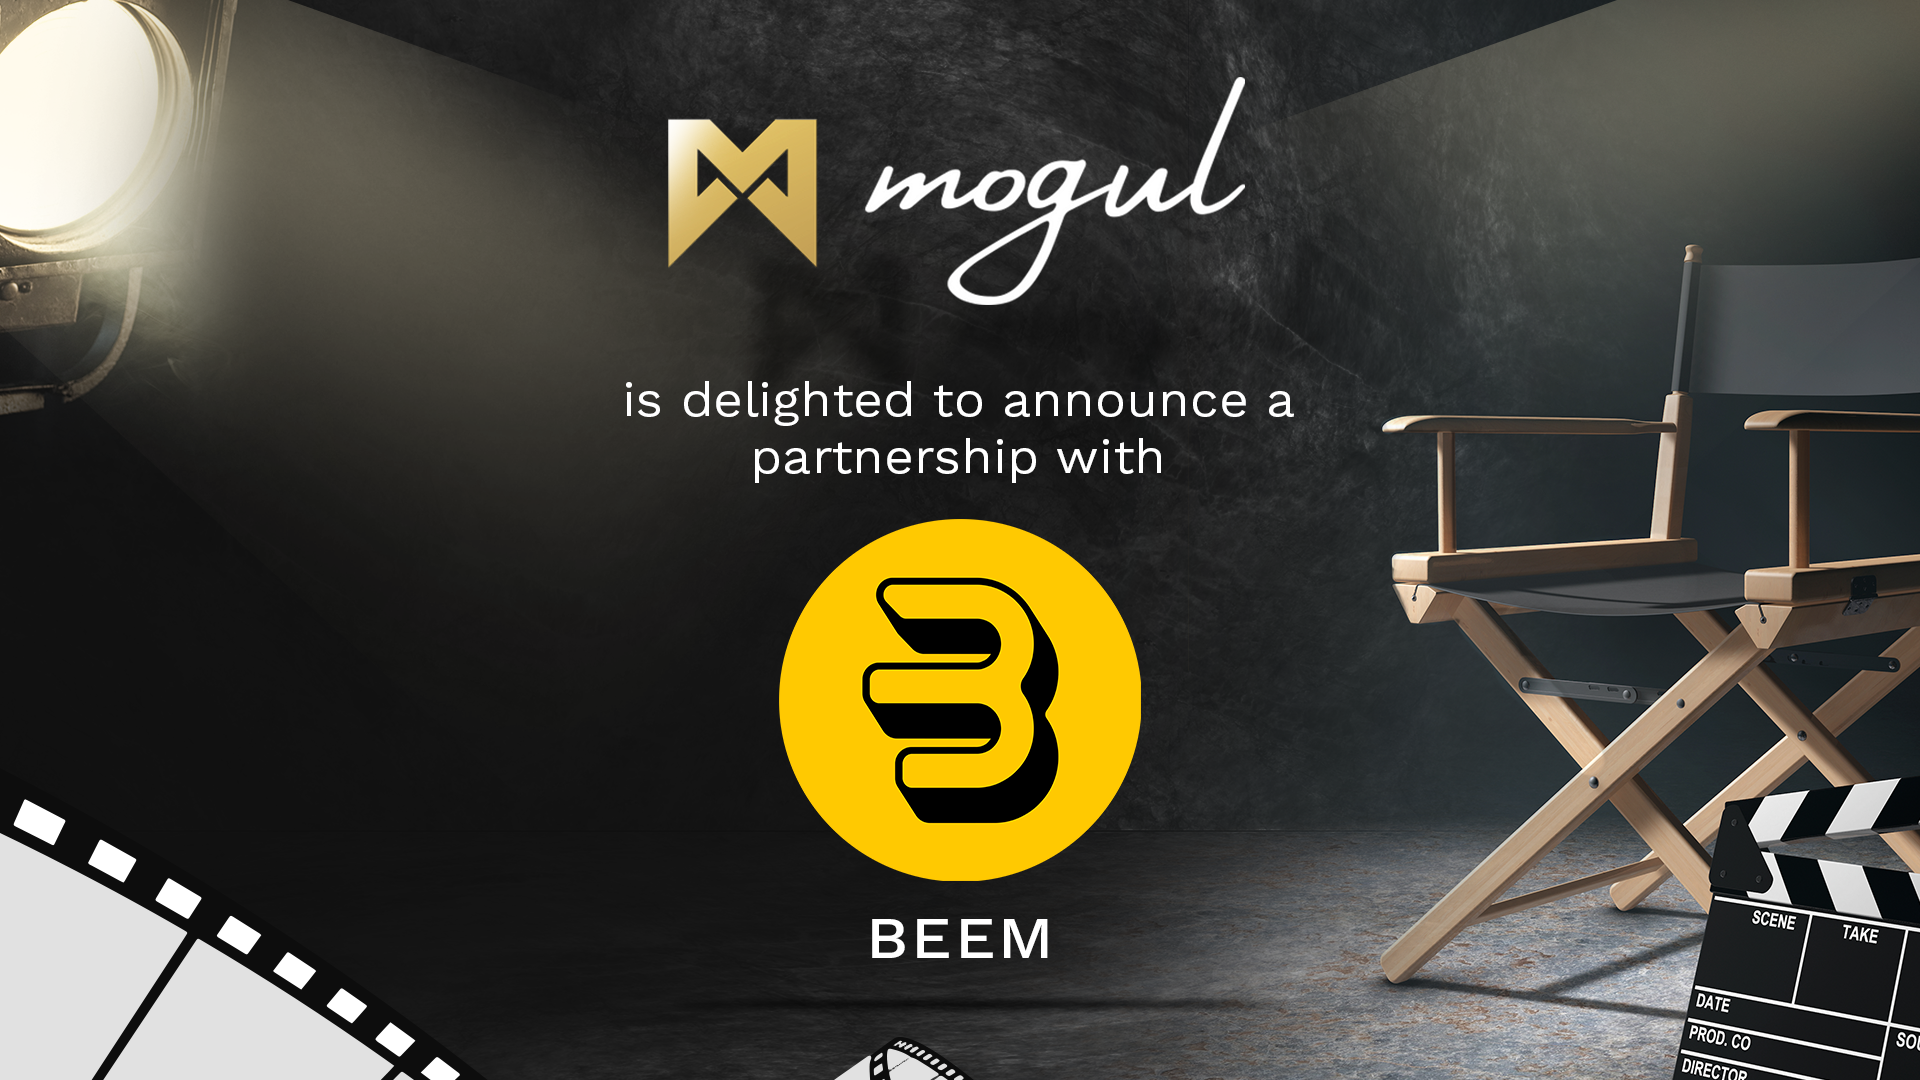 BEEM Partnership Announcement With Mogul